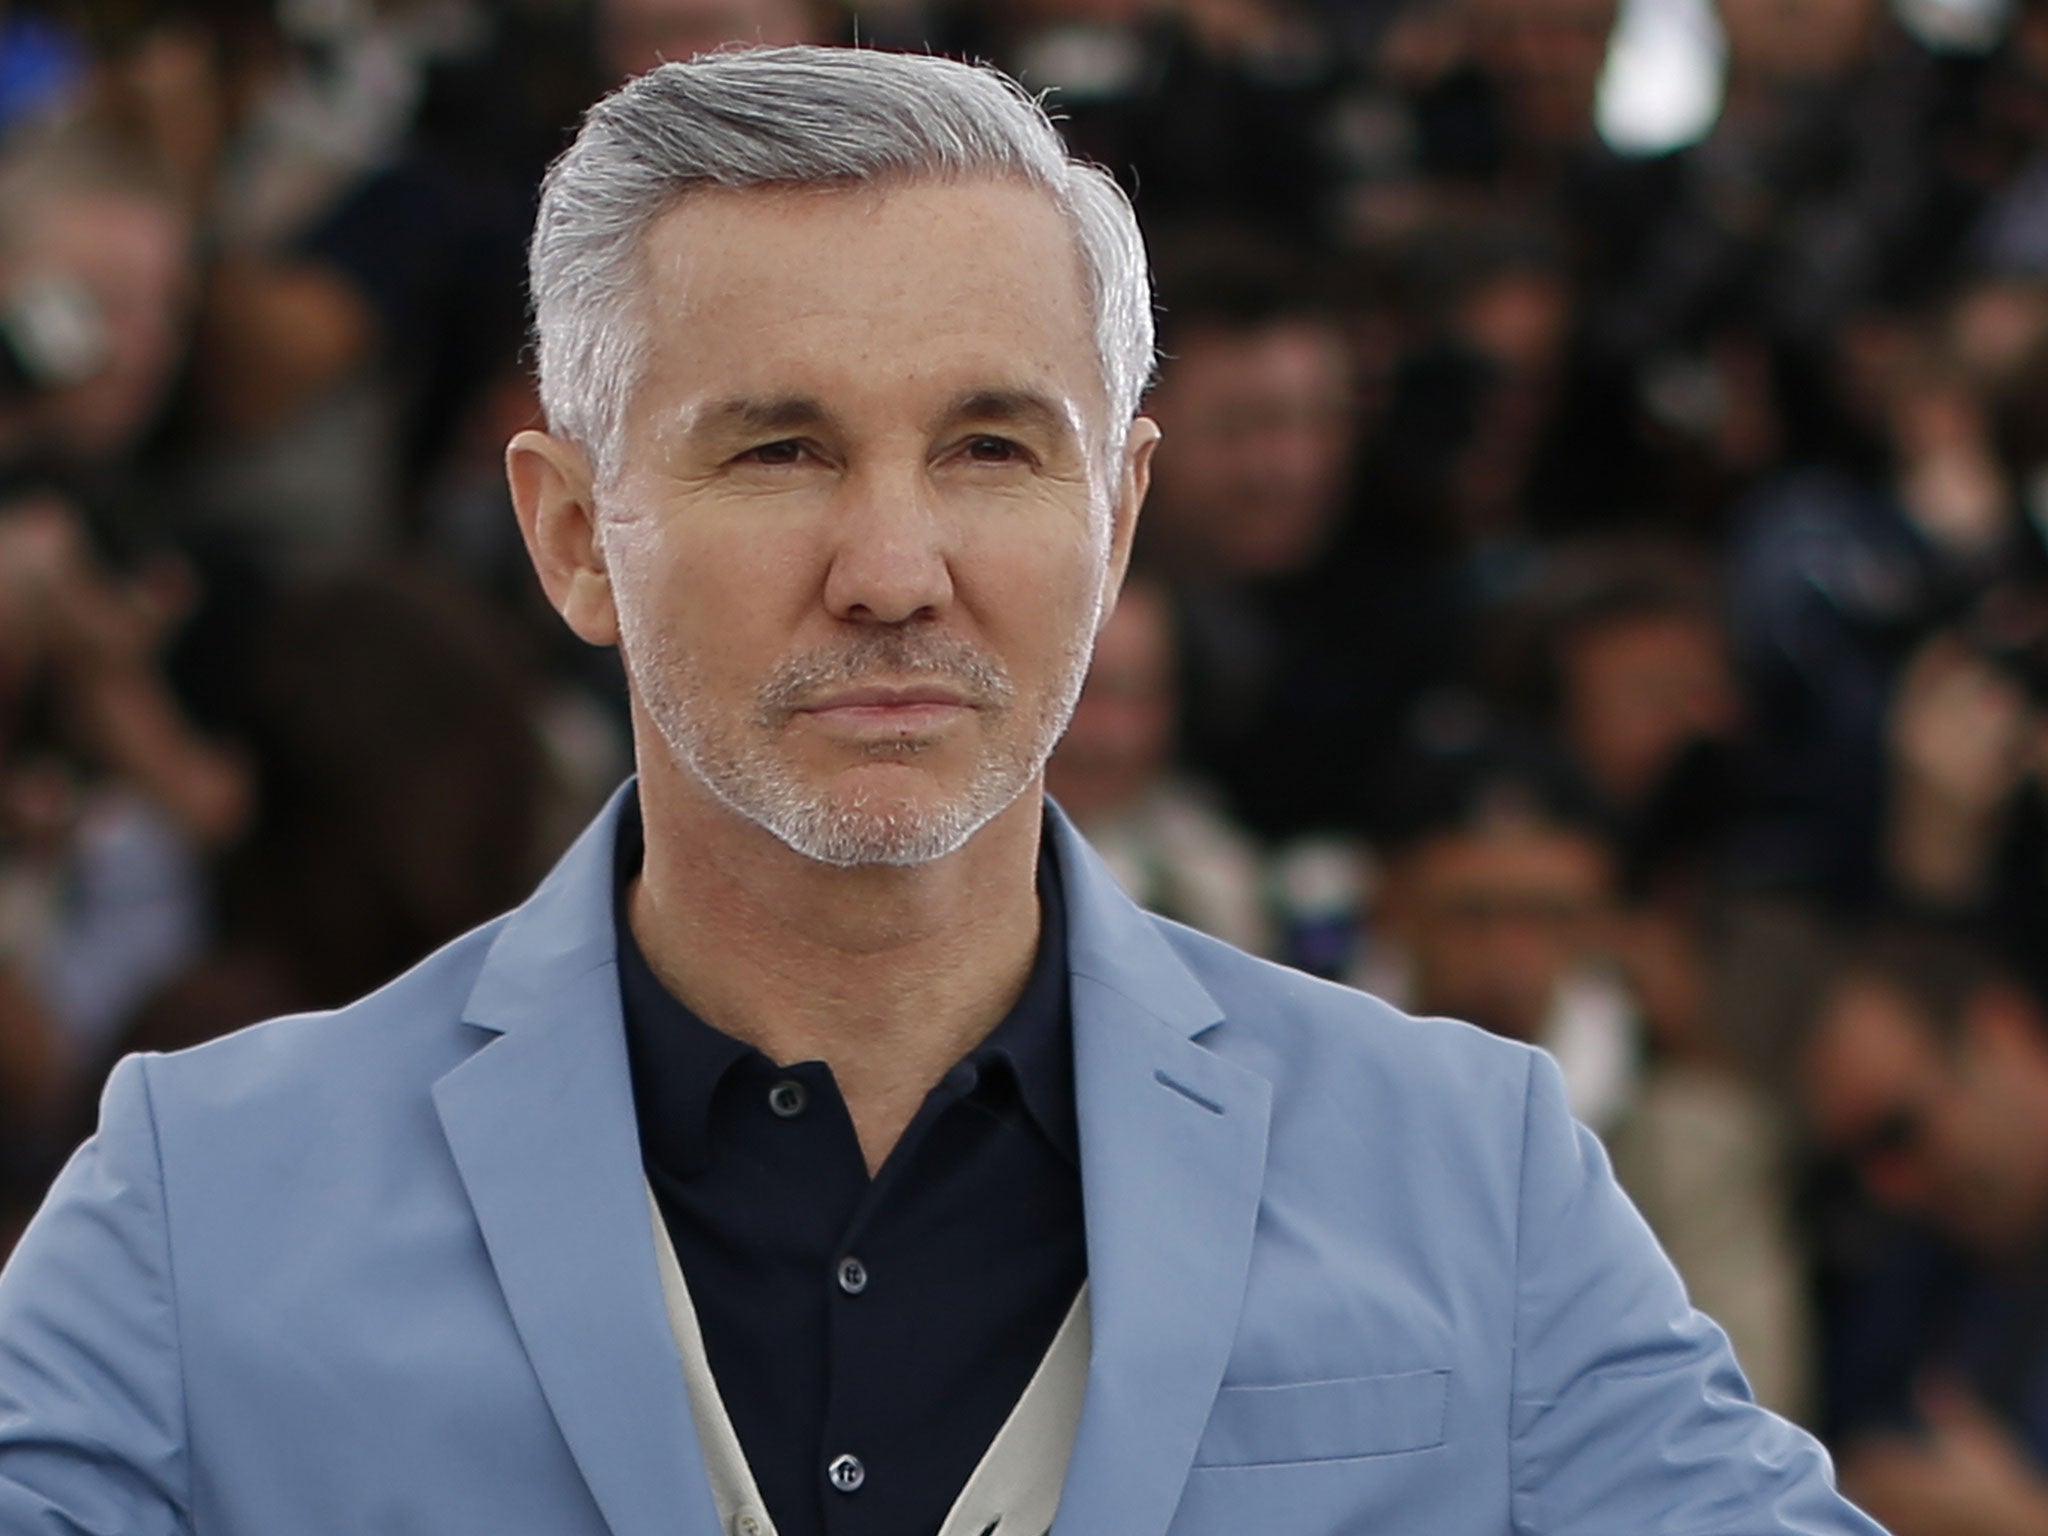 Filmmaker Baz Luhrmann is teaming up with Netflix for a Seventies musical drama